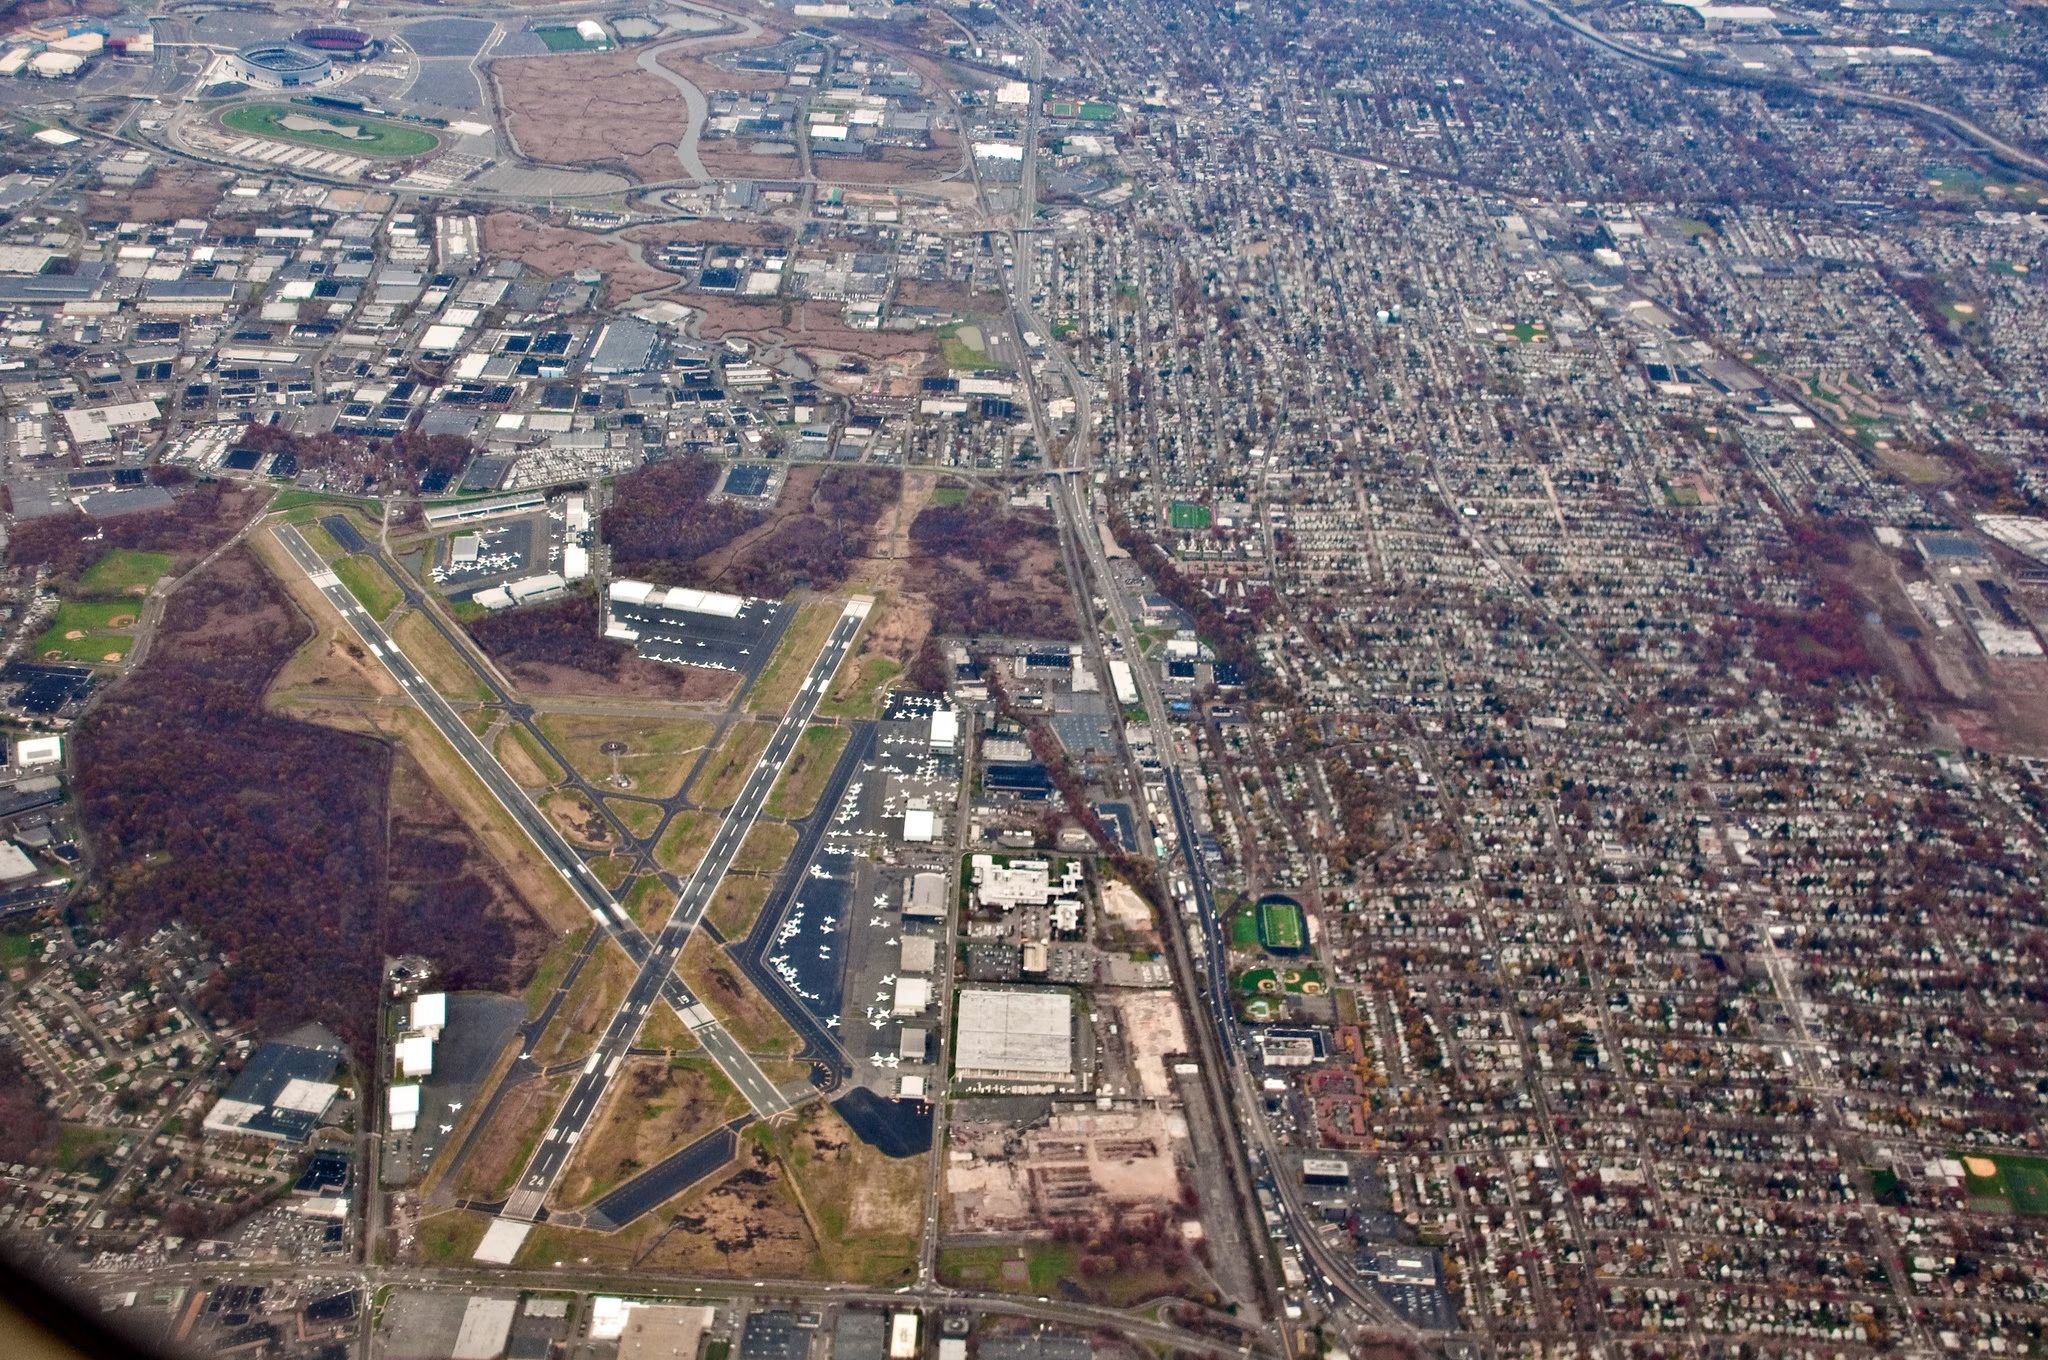 An aerial view of Teterboro Airport.